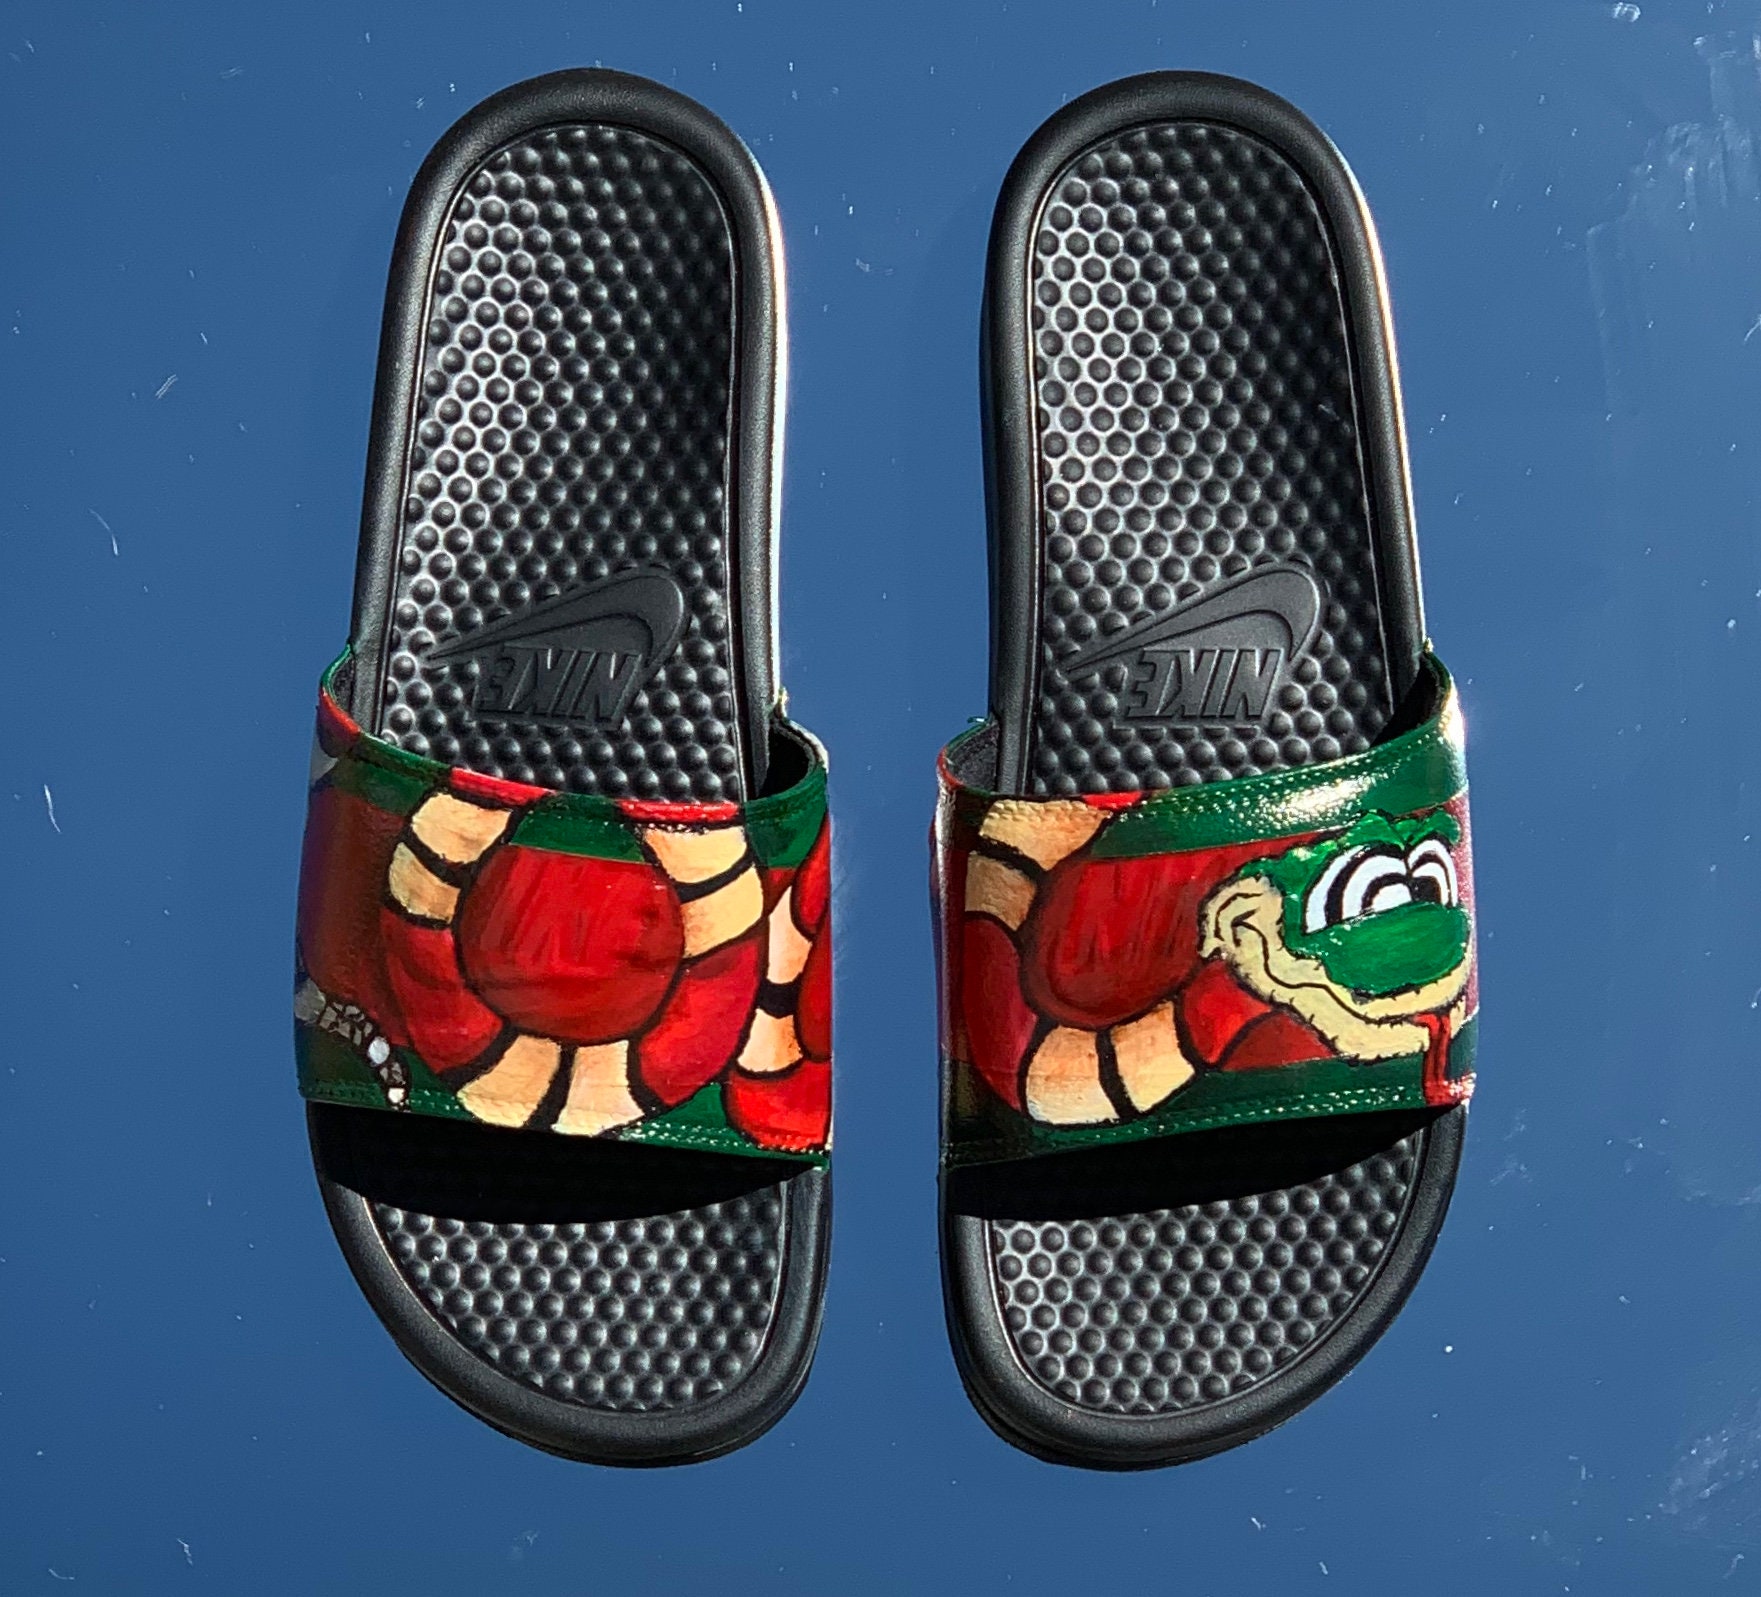 Snake Gucci Nike Slides Inspired by 